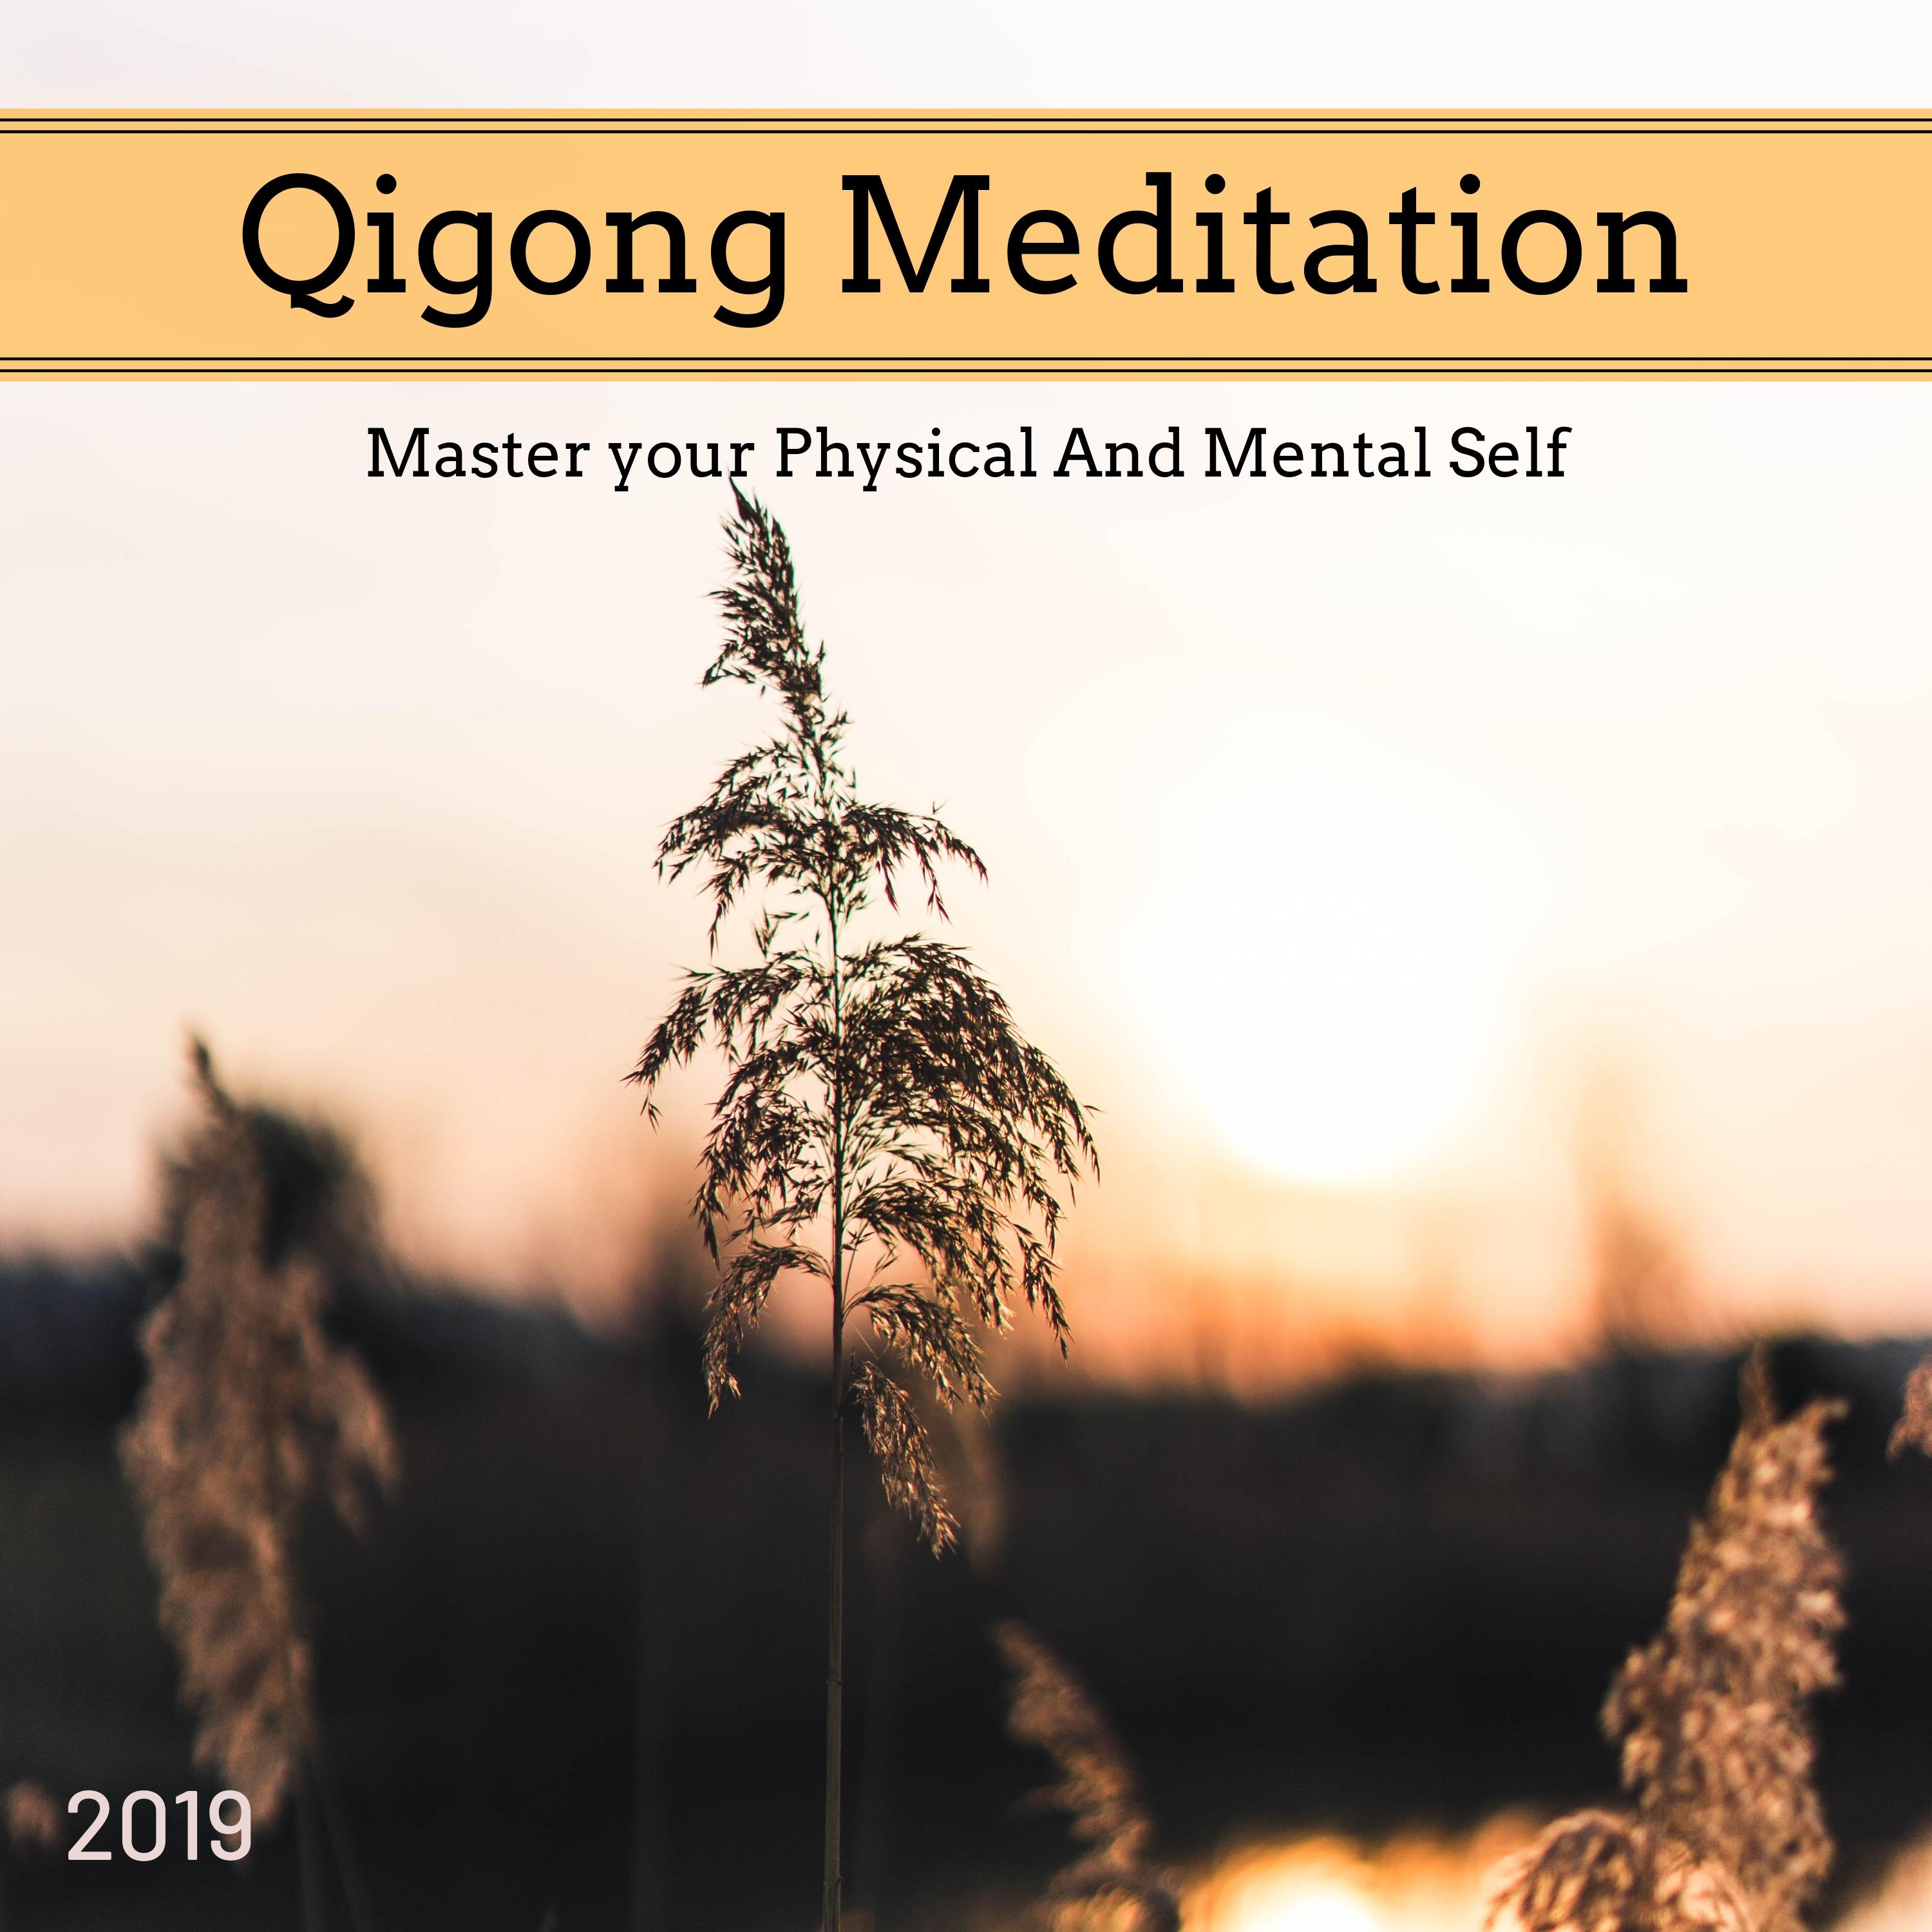 Qigong Meditation 2019: Master your Physical And Mental Self